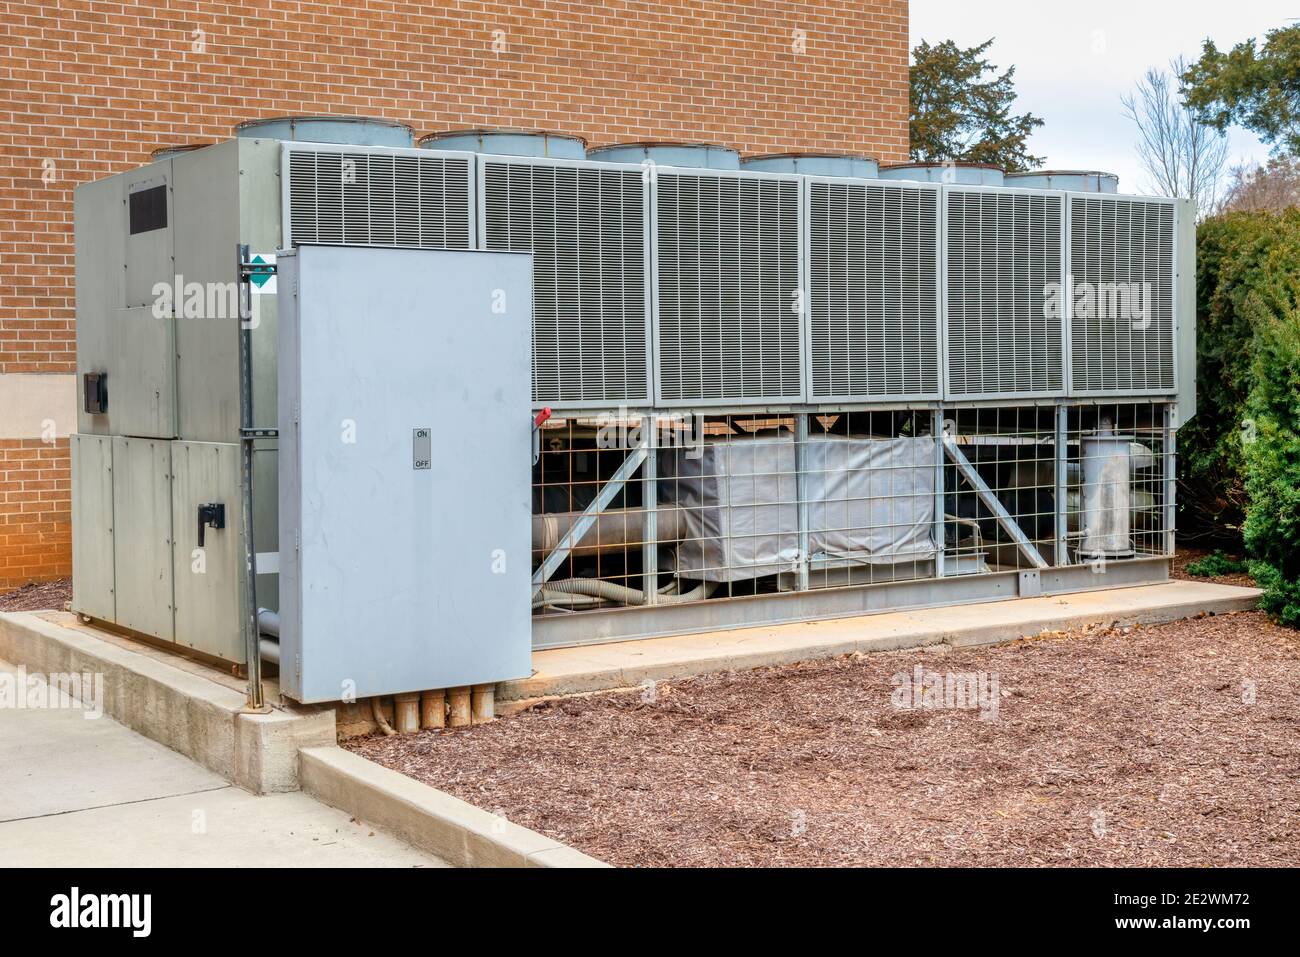 Horizontal and powerful air conditioning system for a commercial property. Stock Photo